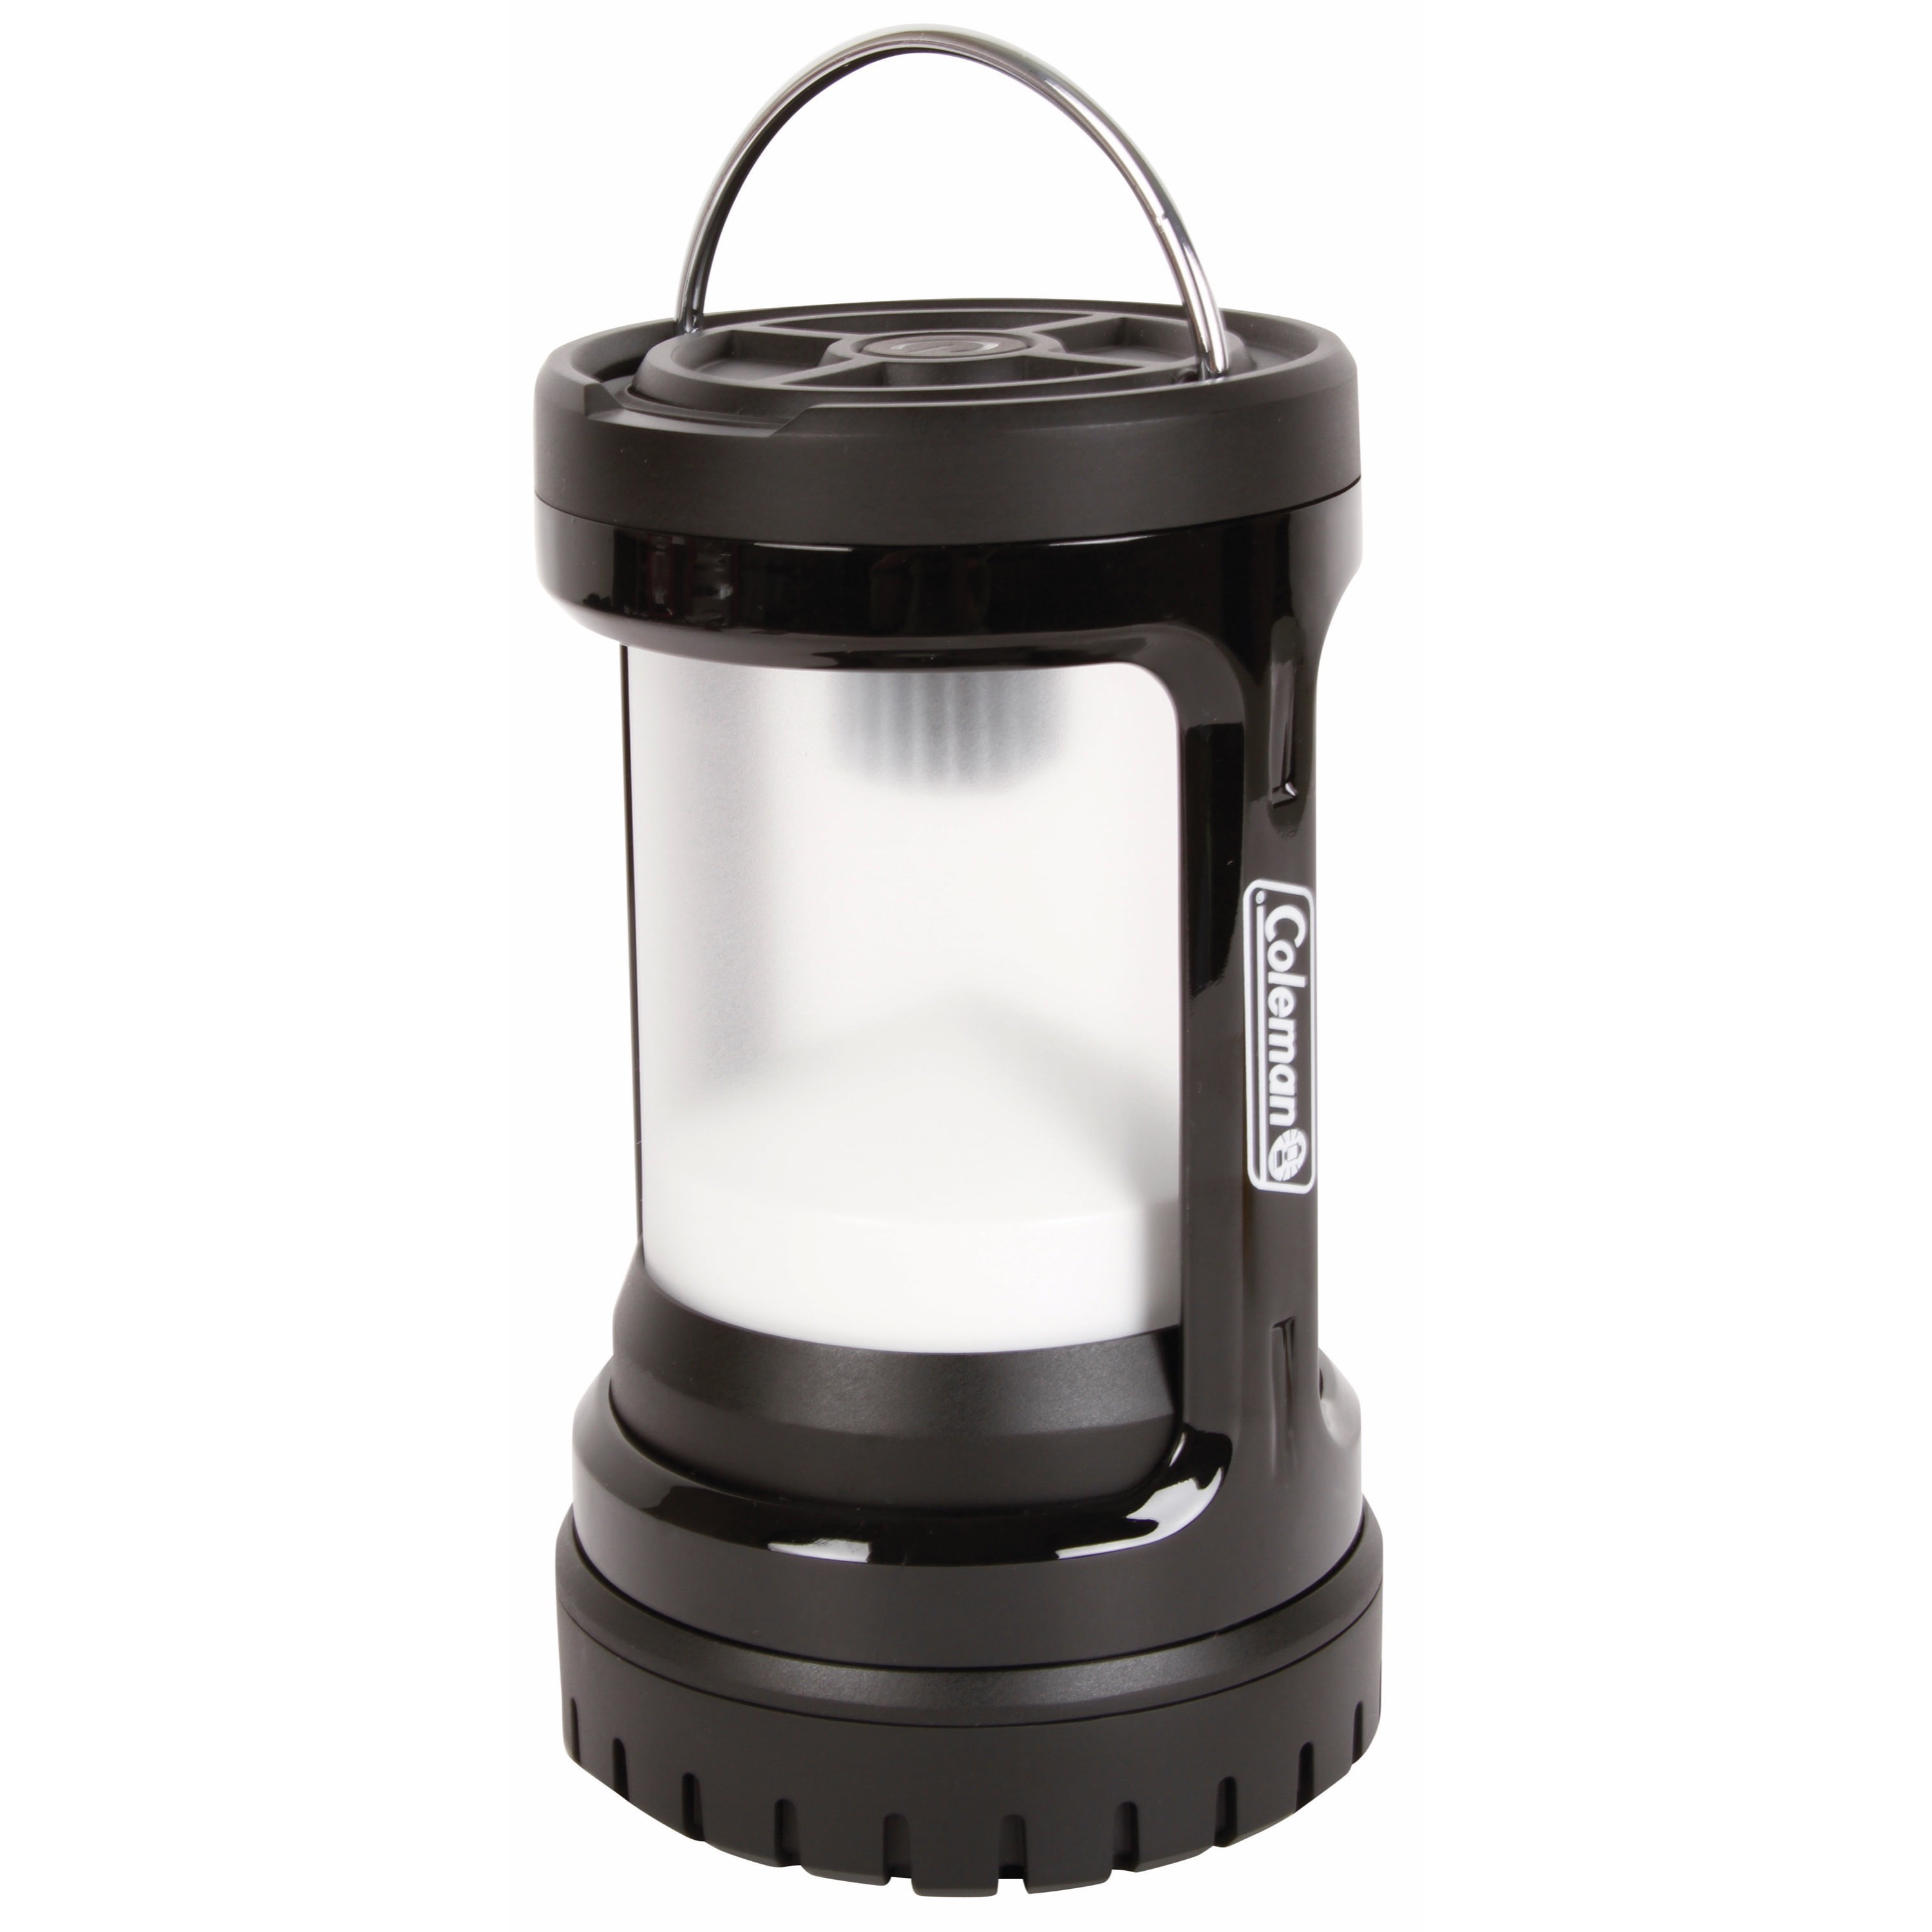 Share The Light With The Coleman Quad Lantern